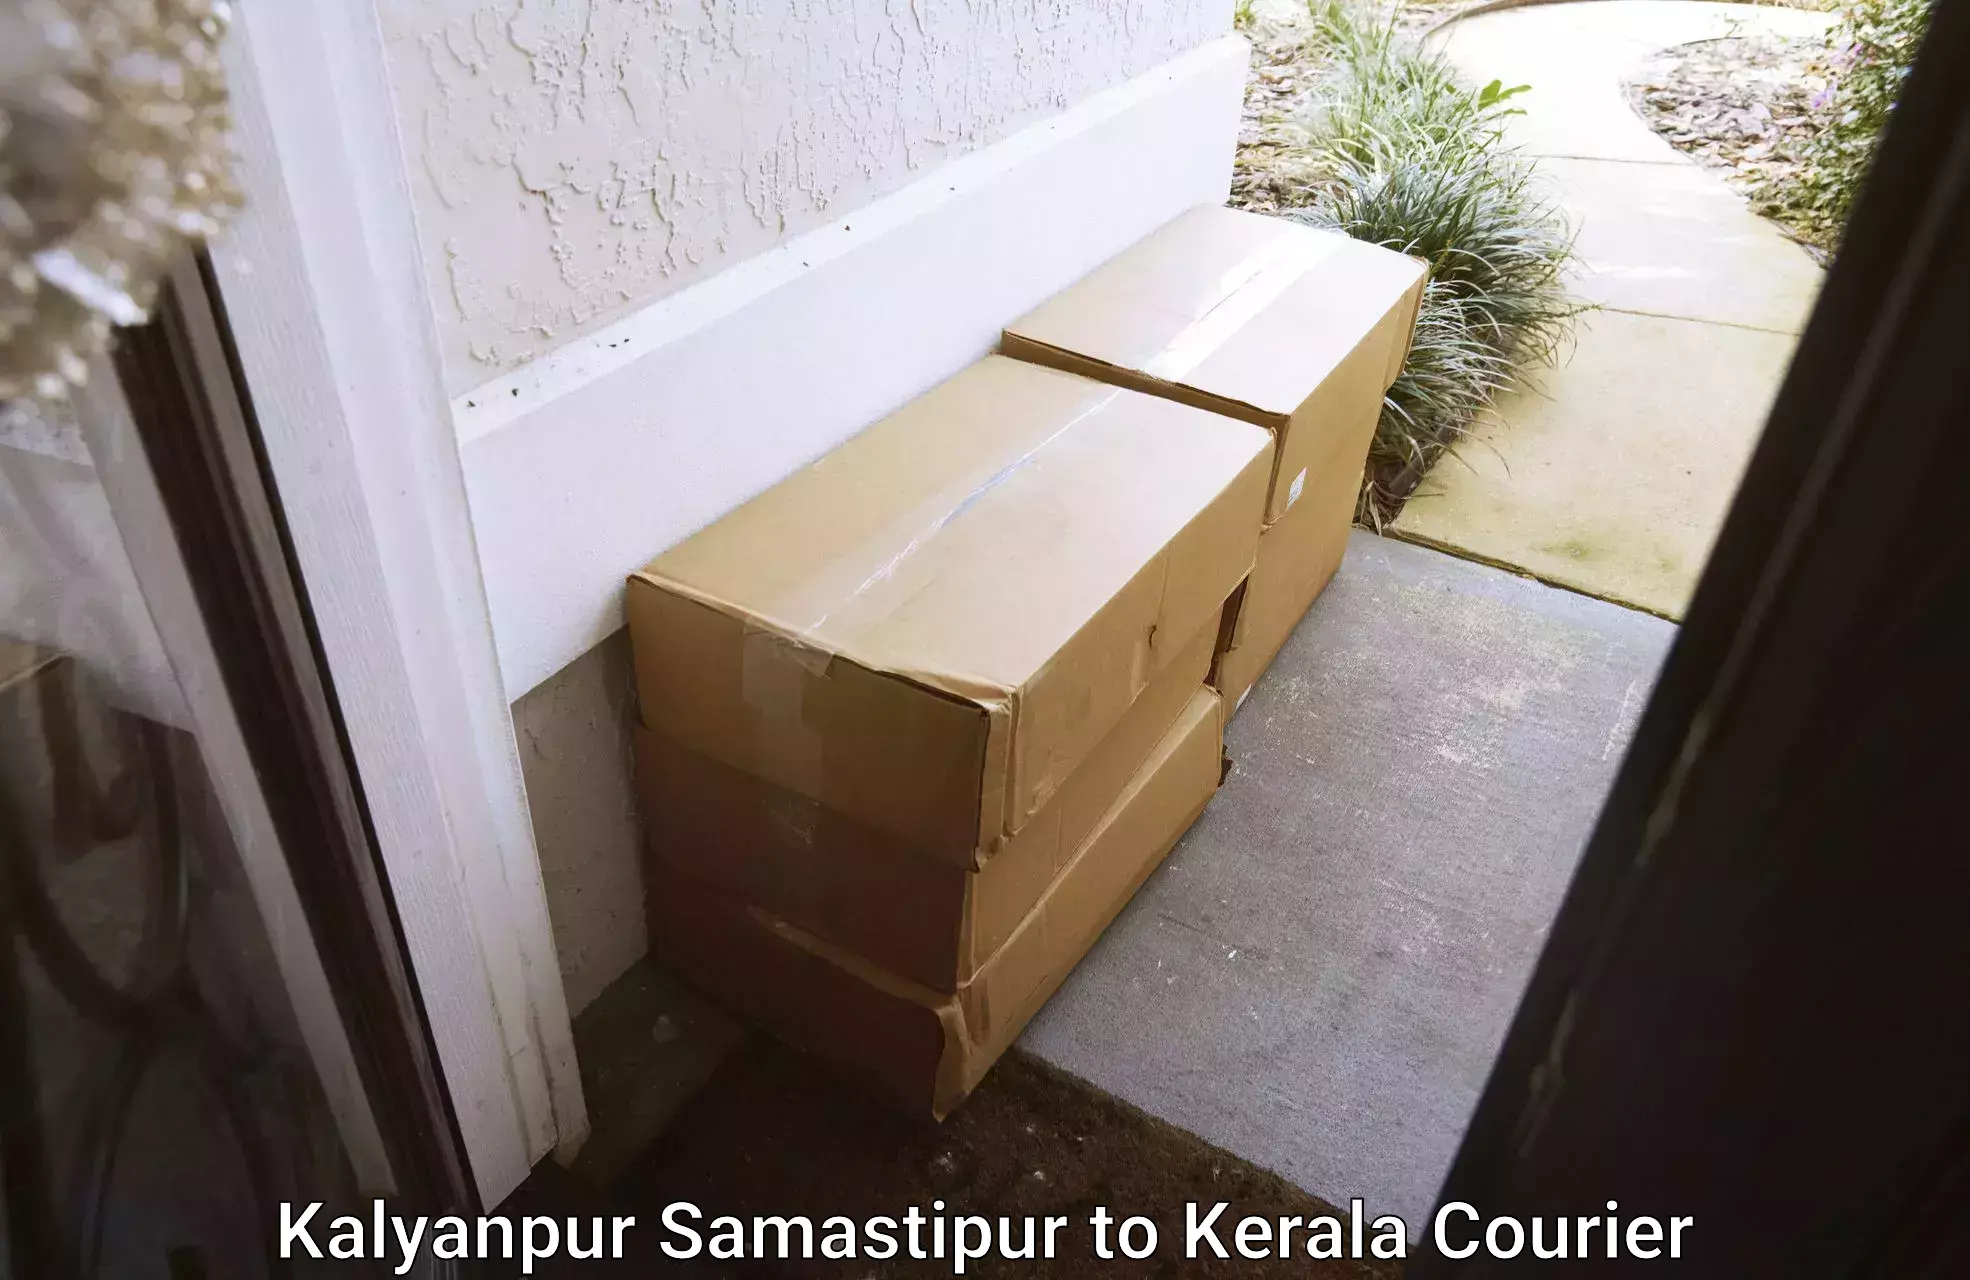 Trusted relocation experts Kalyanpur Samastipur to Kerala